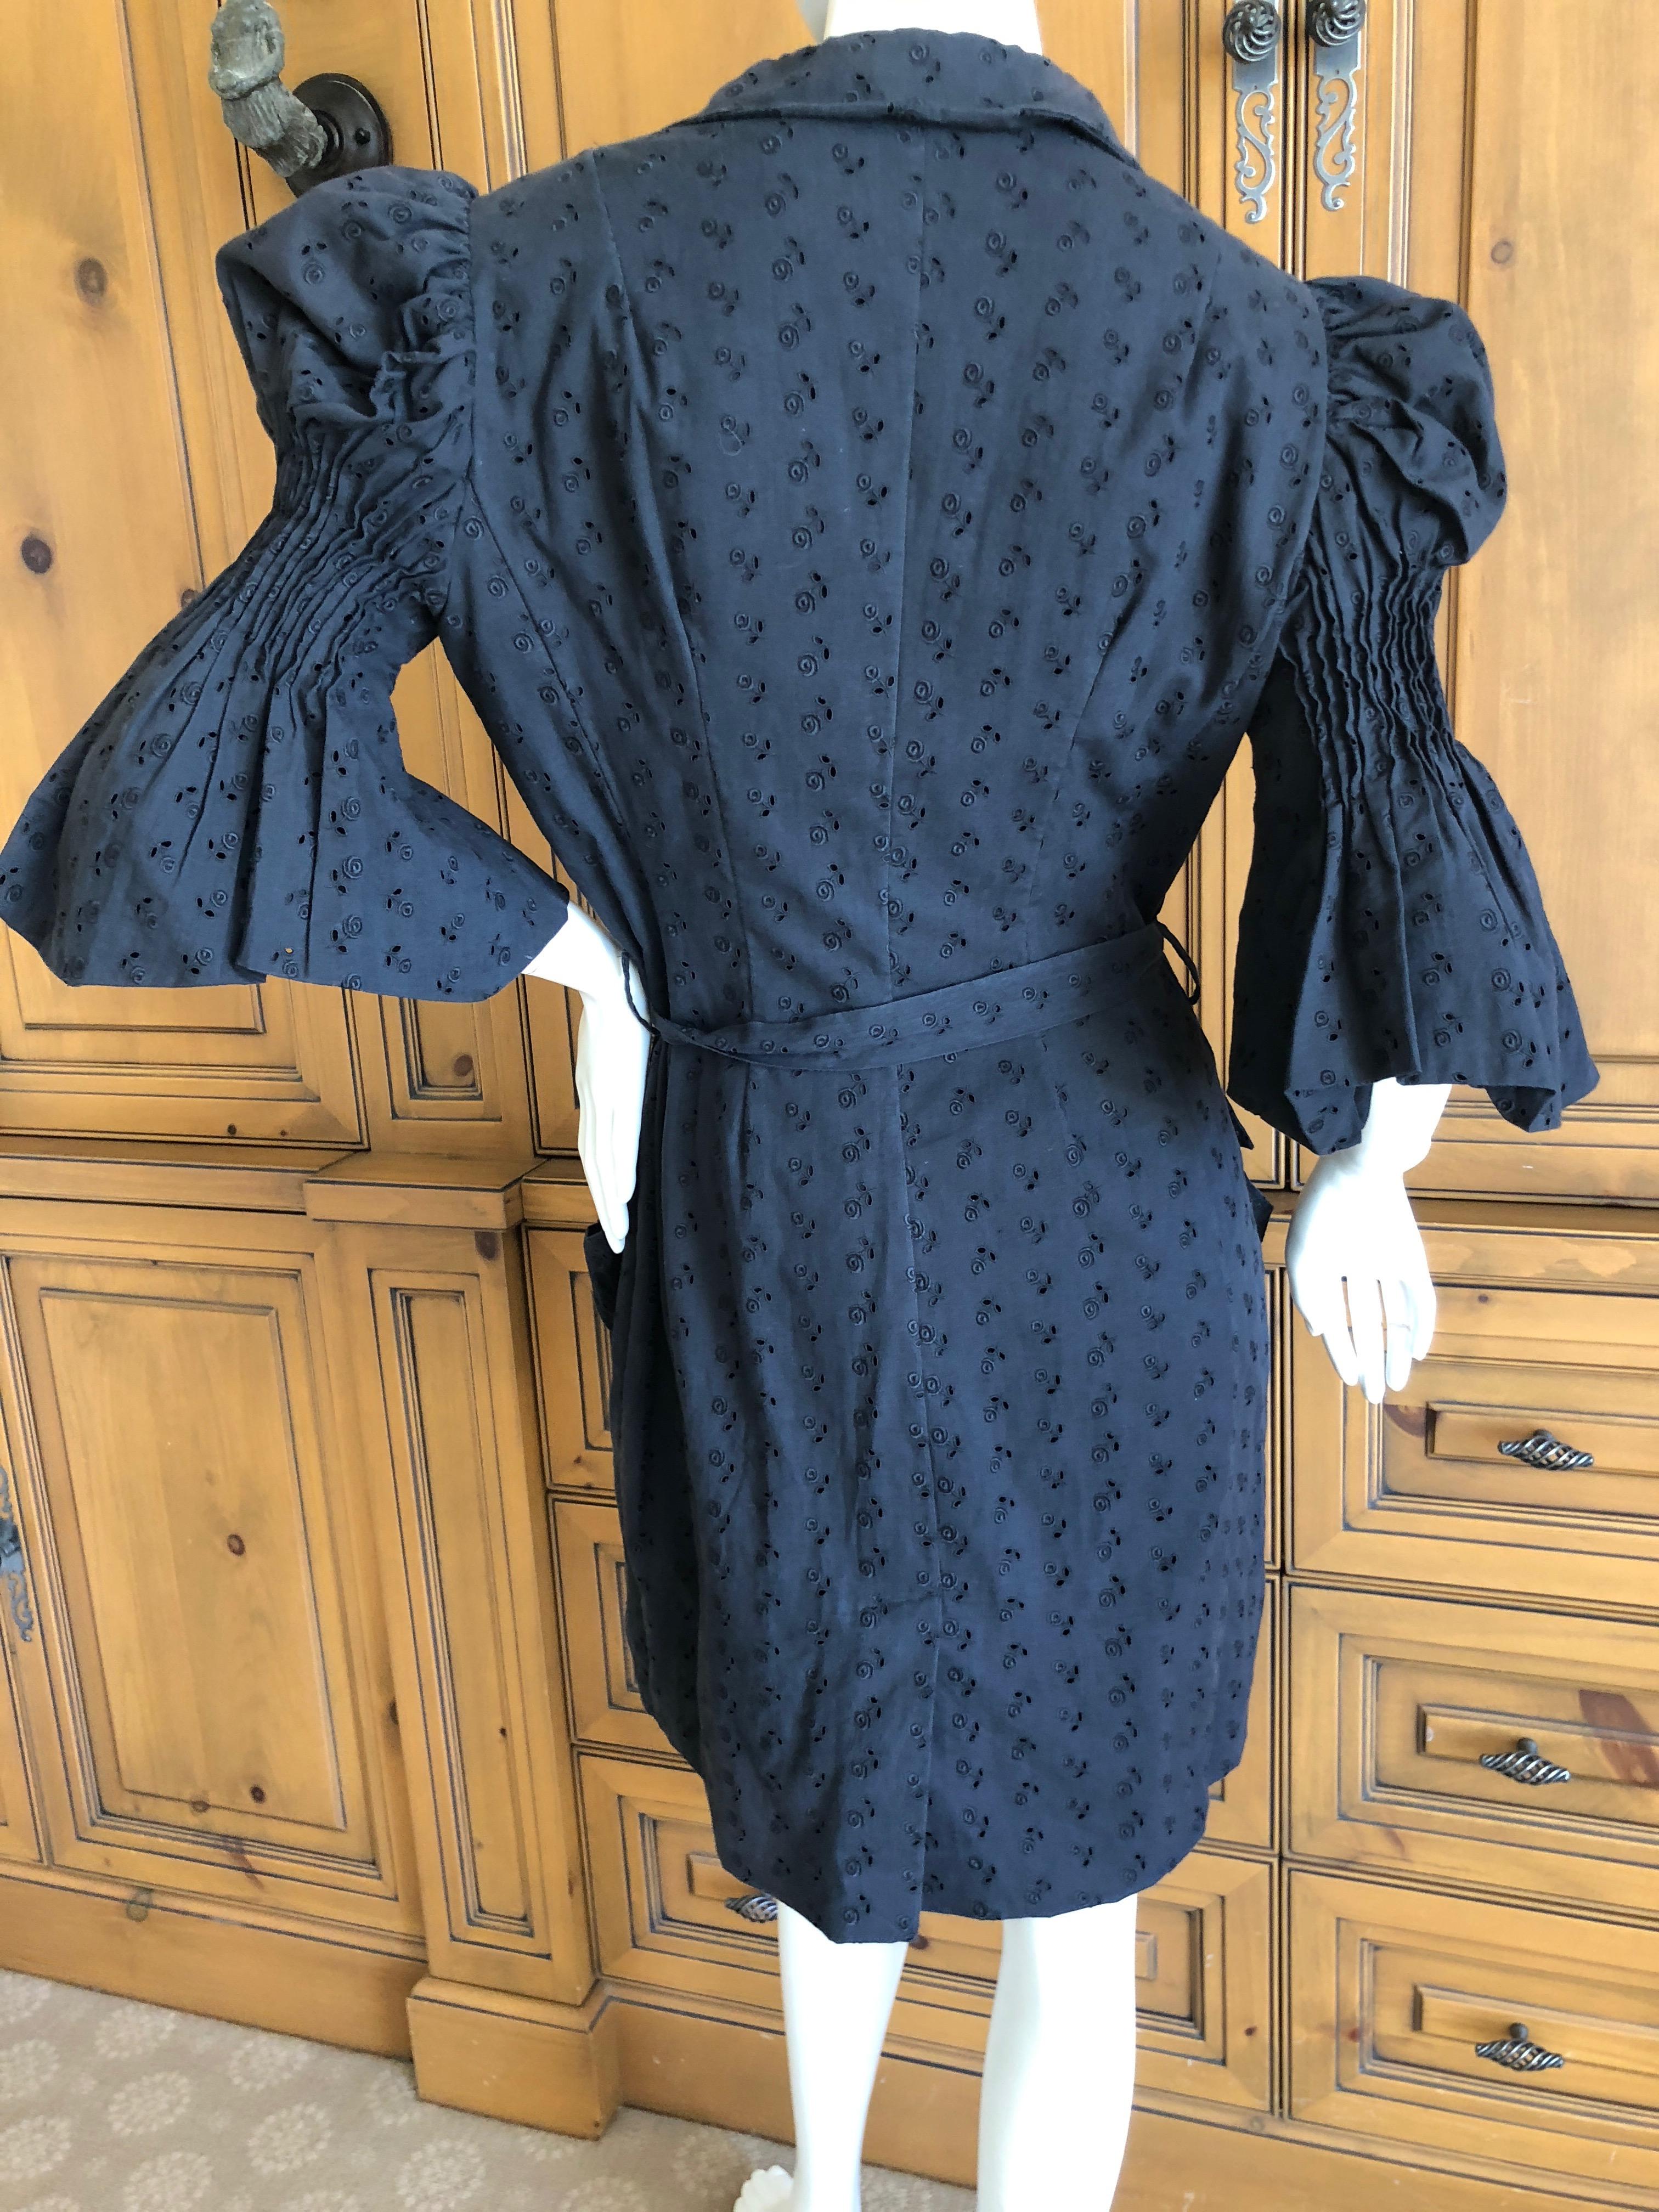  John Galliano 1998 Black Belted Cotton Eyelet Dress with Leg of Mutton Sleeves.
So much prettier in person. Please use zoom feature to see details.
Sz 42
Bust 40